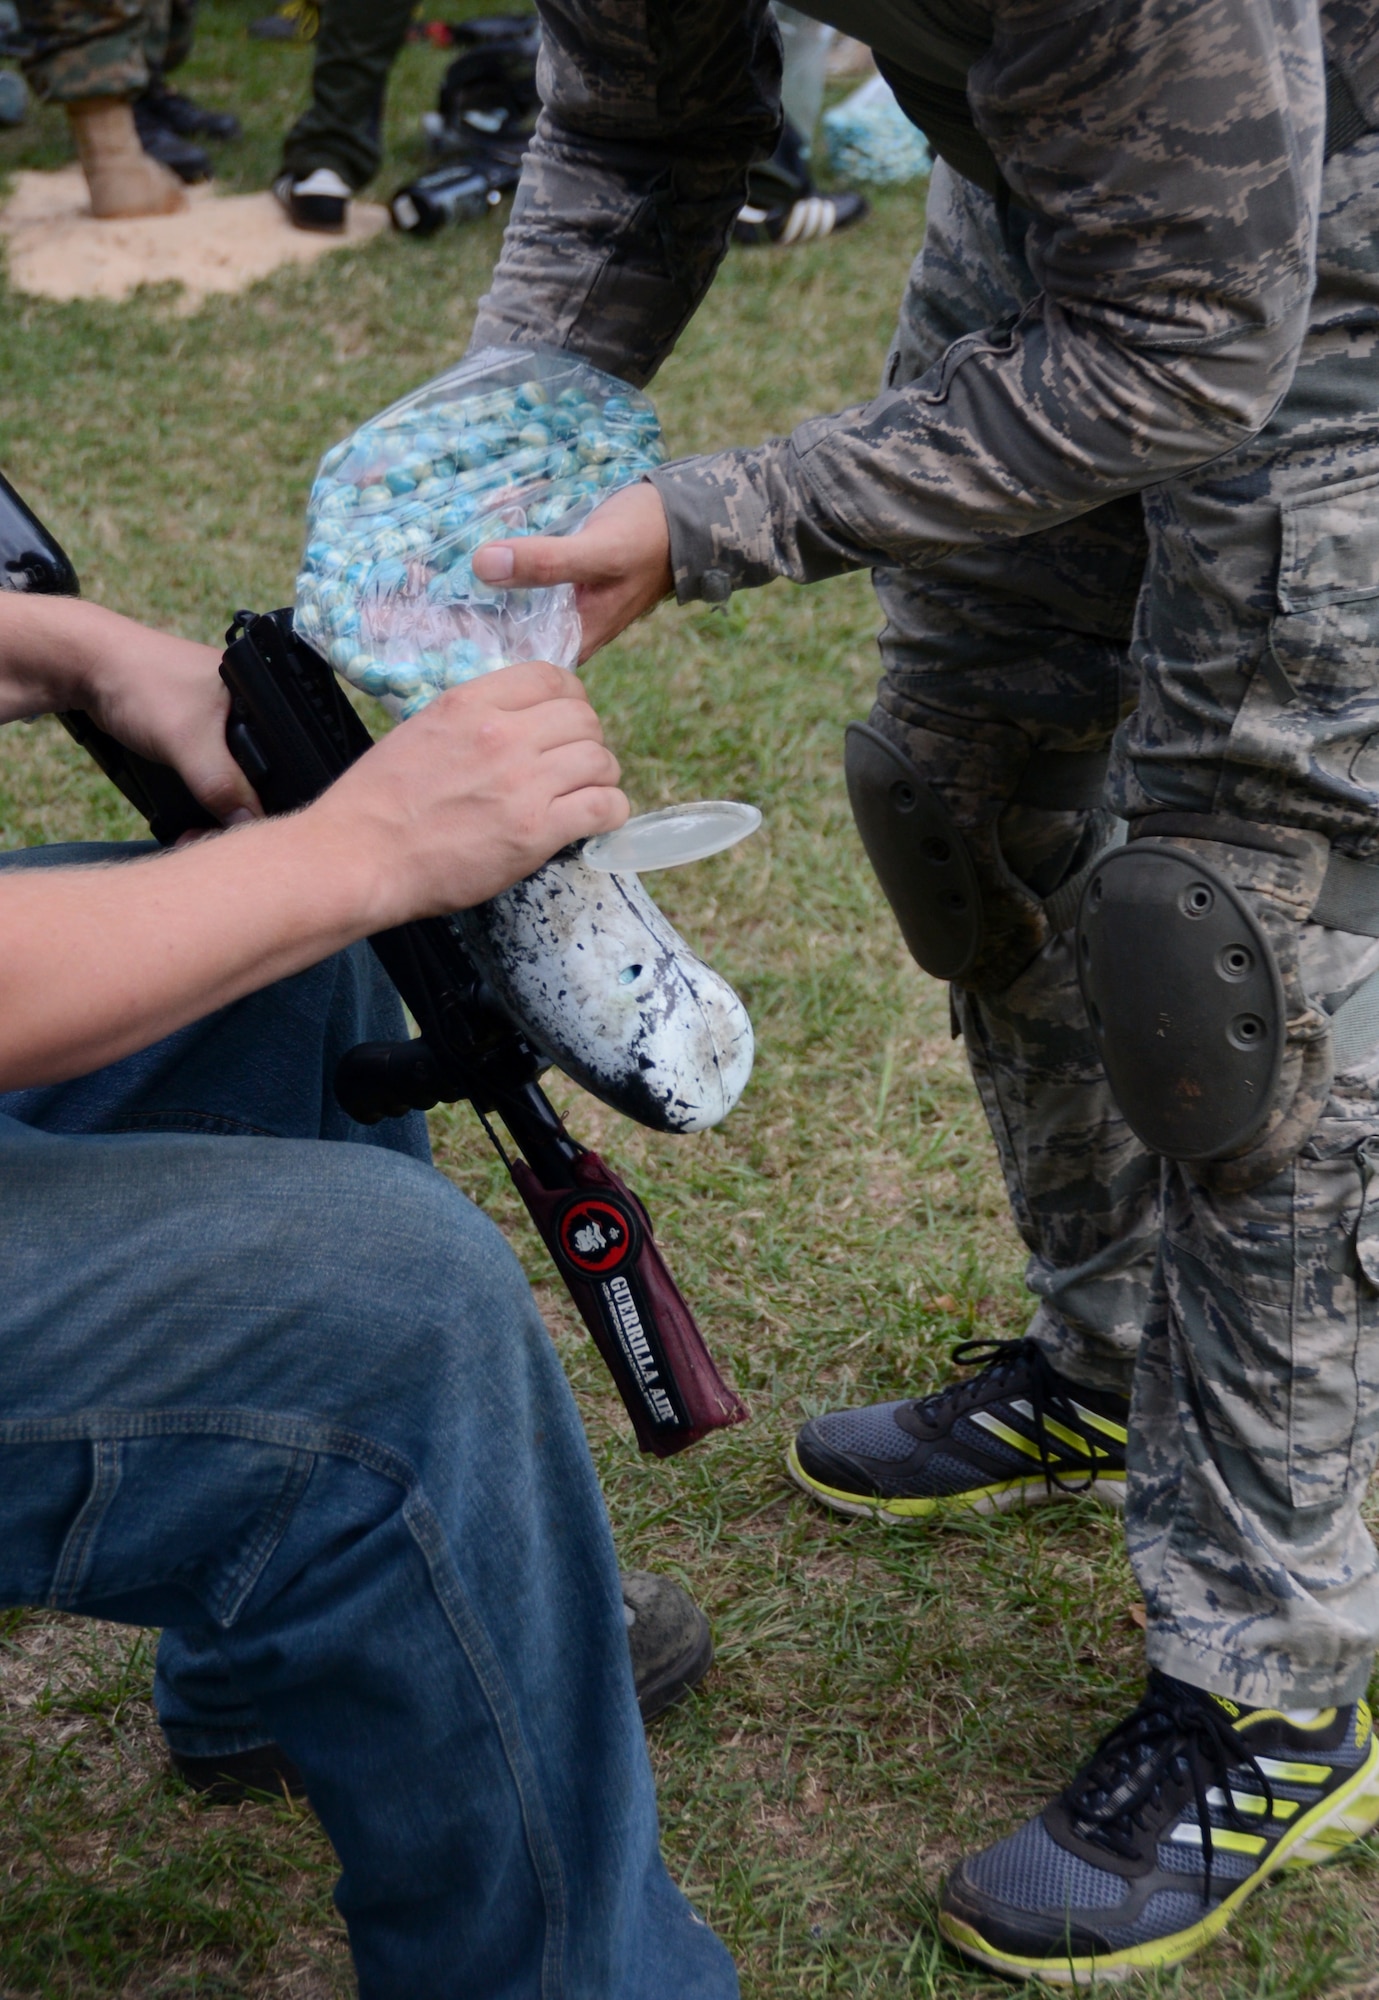 Humans load their weapons with paintballs prior to the Zombie Apocalypse paintball game on Barksdale Air Force Base, La., Sept. 28, 2013. The game, held on the East Reservation on base, pitted teams of humans against oncoming waves of zombies. (U.S. Air Force photo/Staff Sgt. Amber Corcoran)